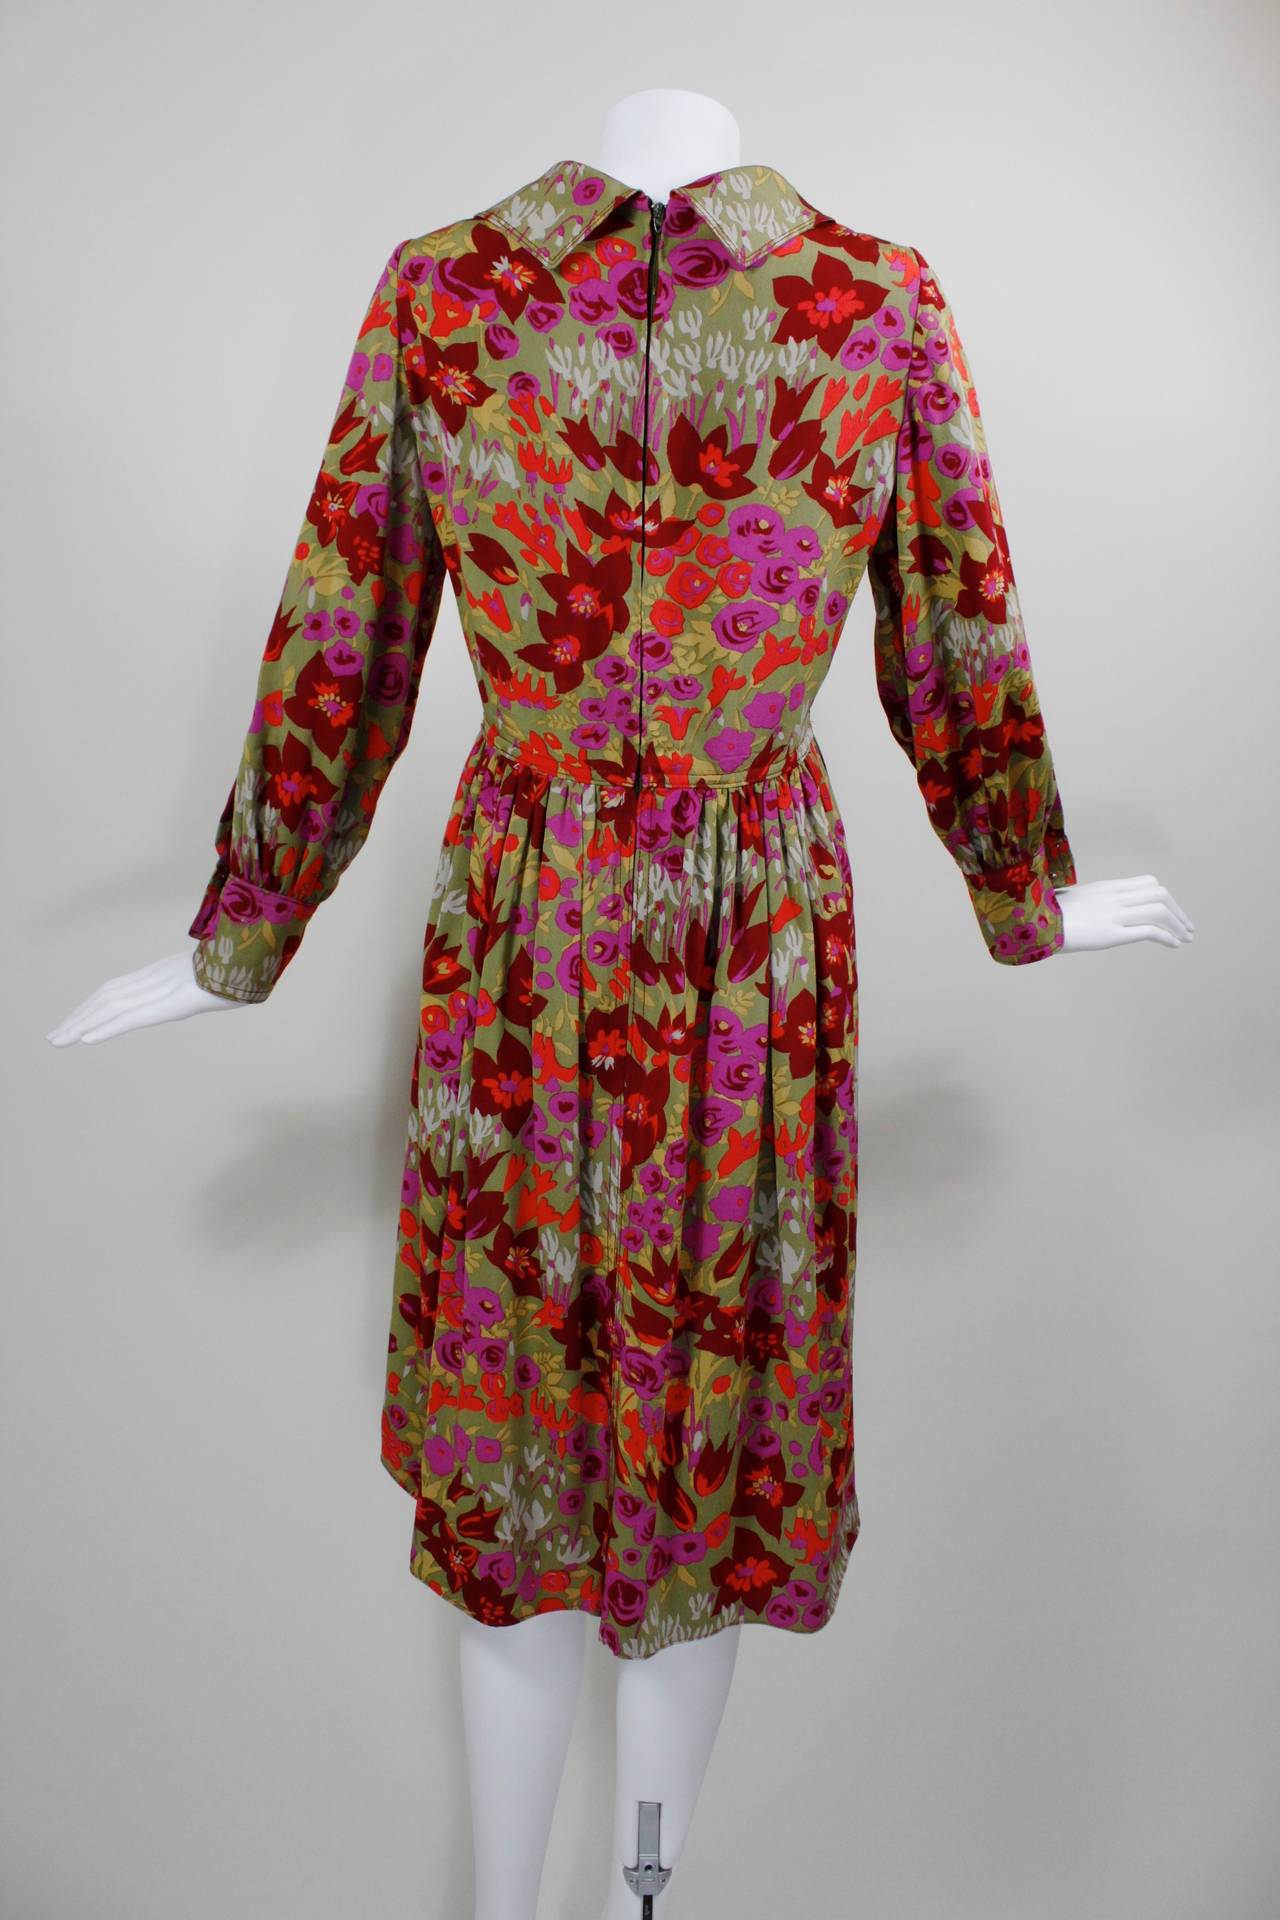 Galanos Multicolor Floral Pan Collar Dress In Excellent Condition For Sale In Los Angeles, CA